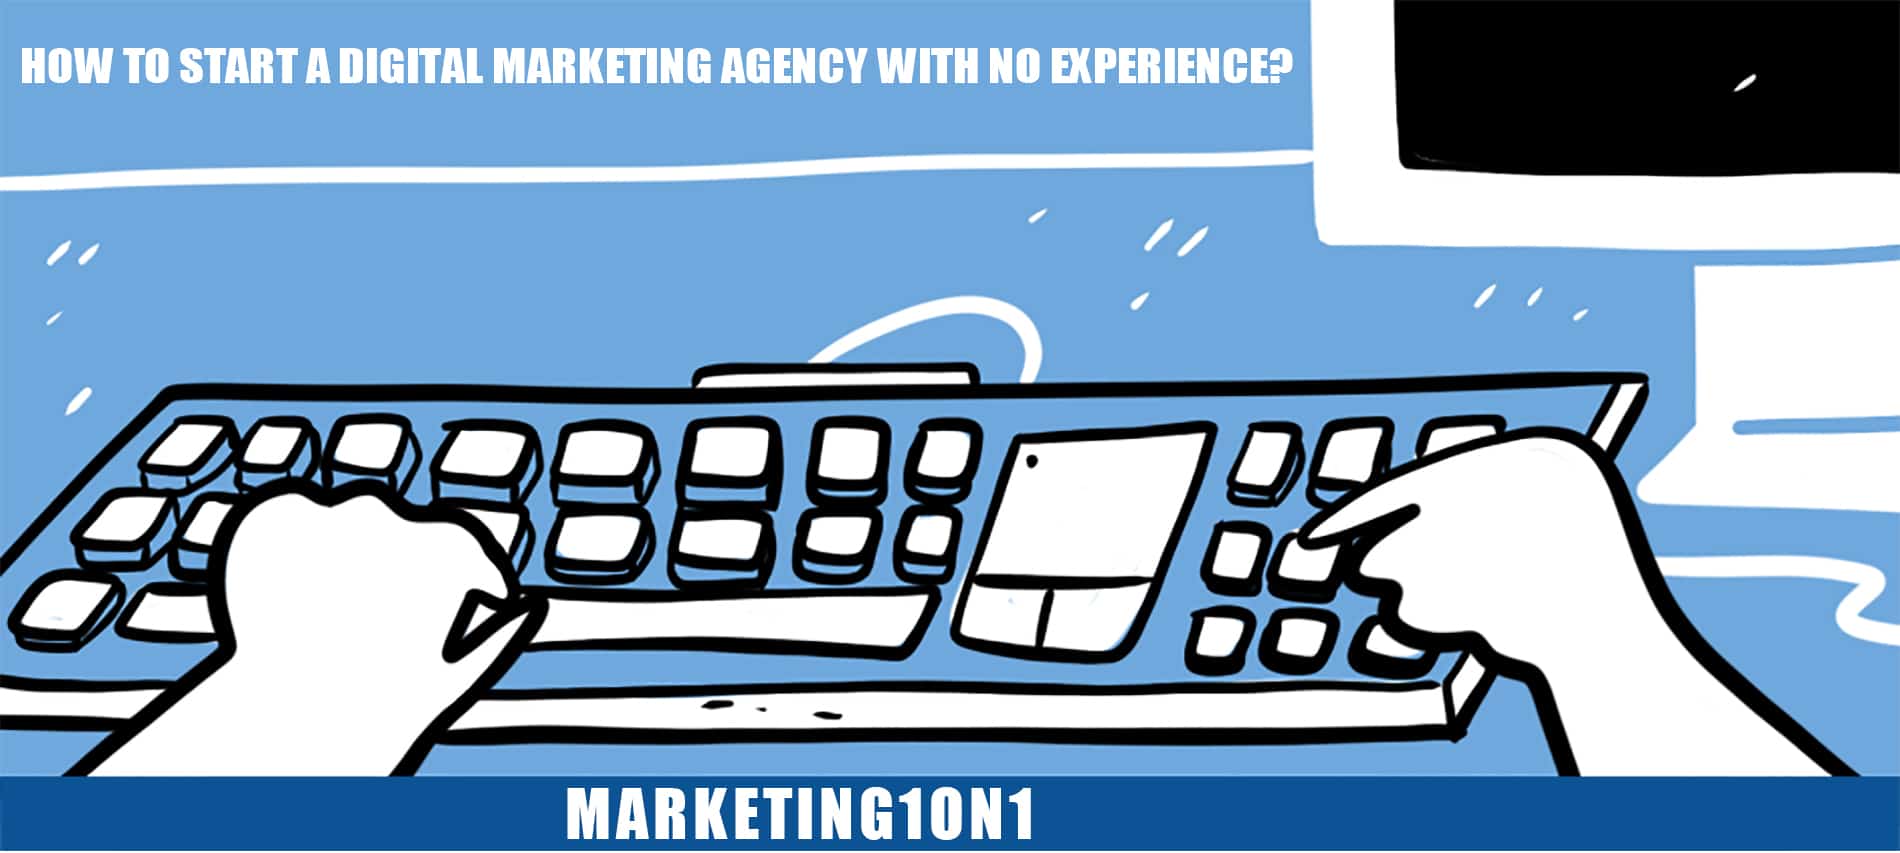 How to start a digital marketing agency with no experience?